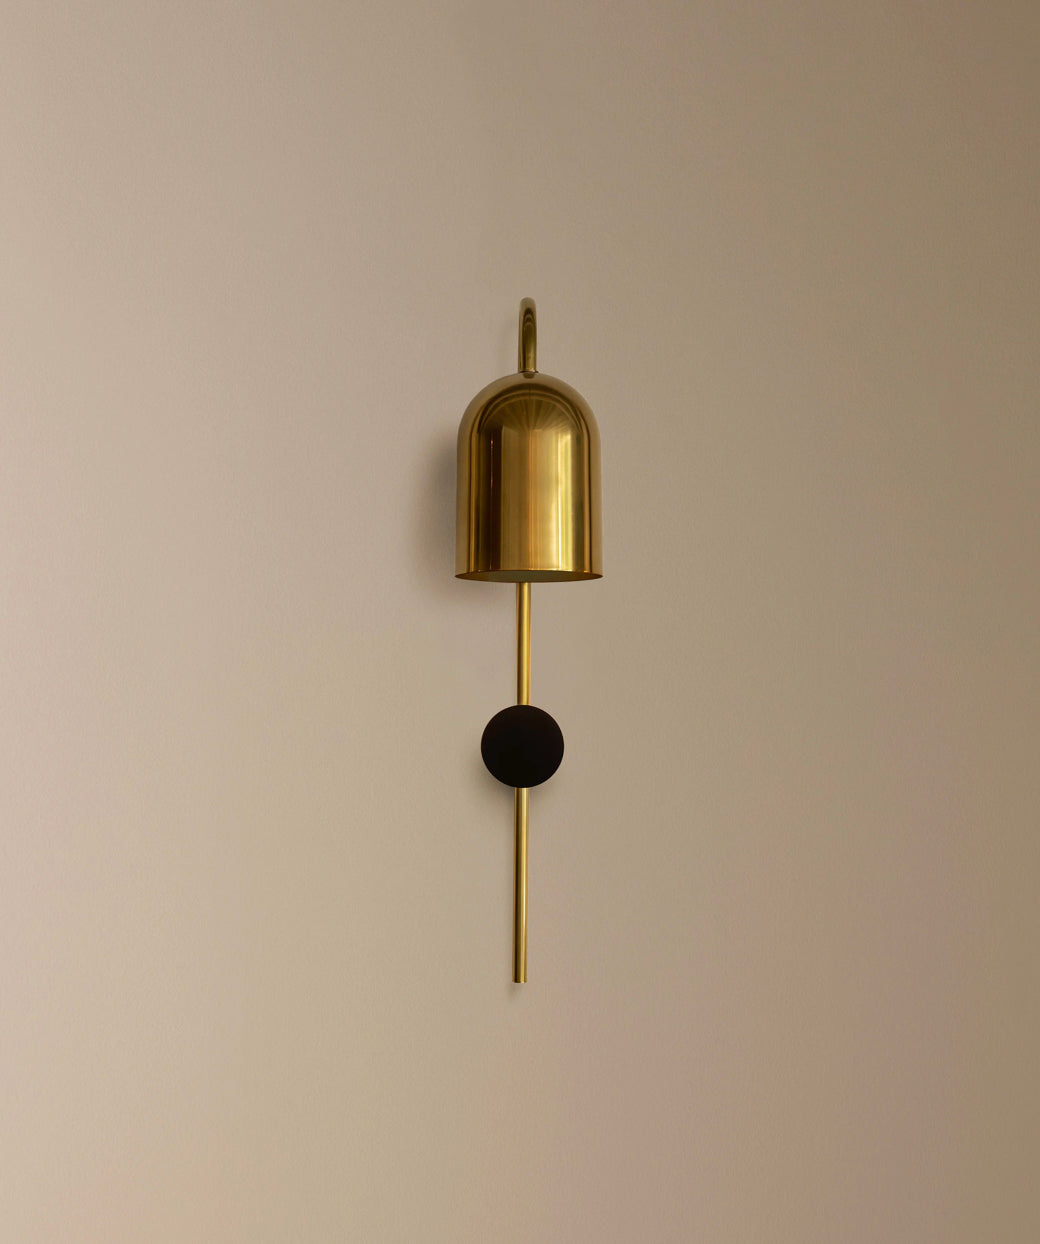 DUOMO PICCOLO STEM WALL LIGHT by Nightworks